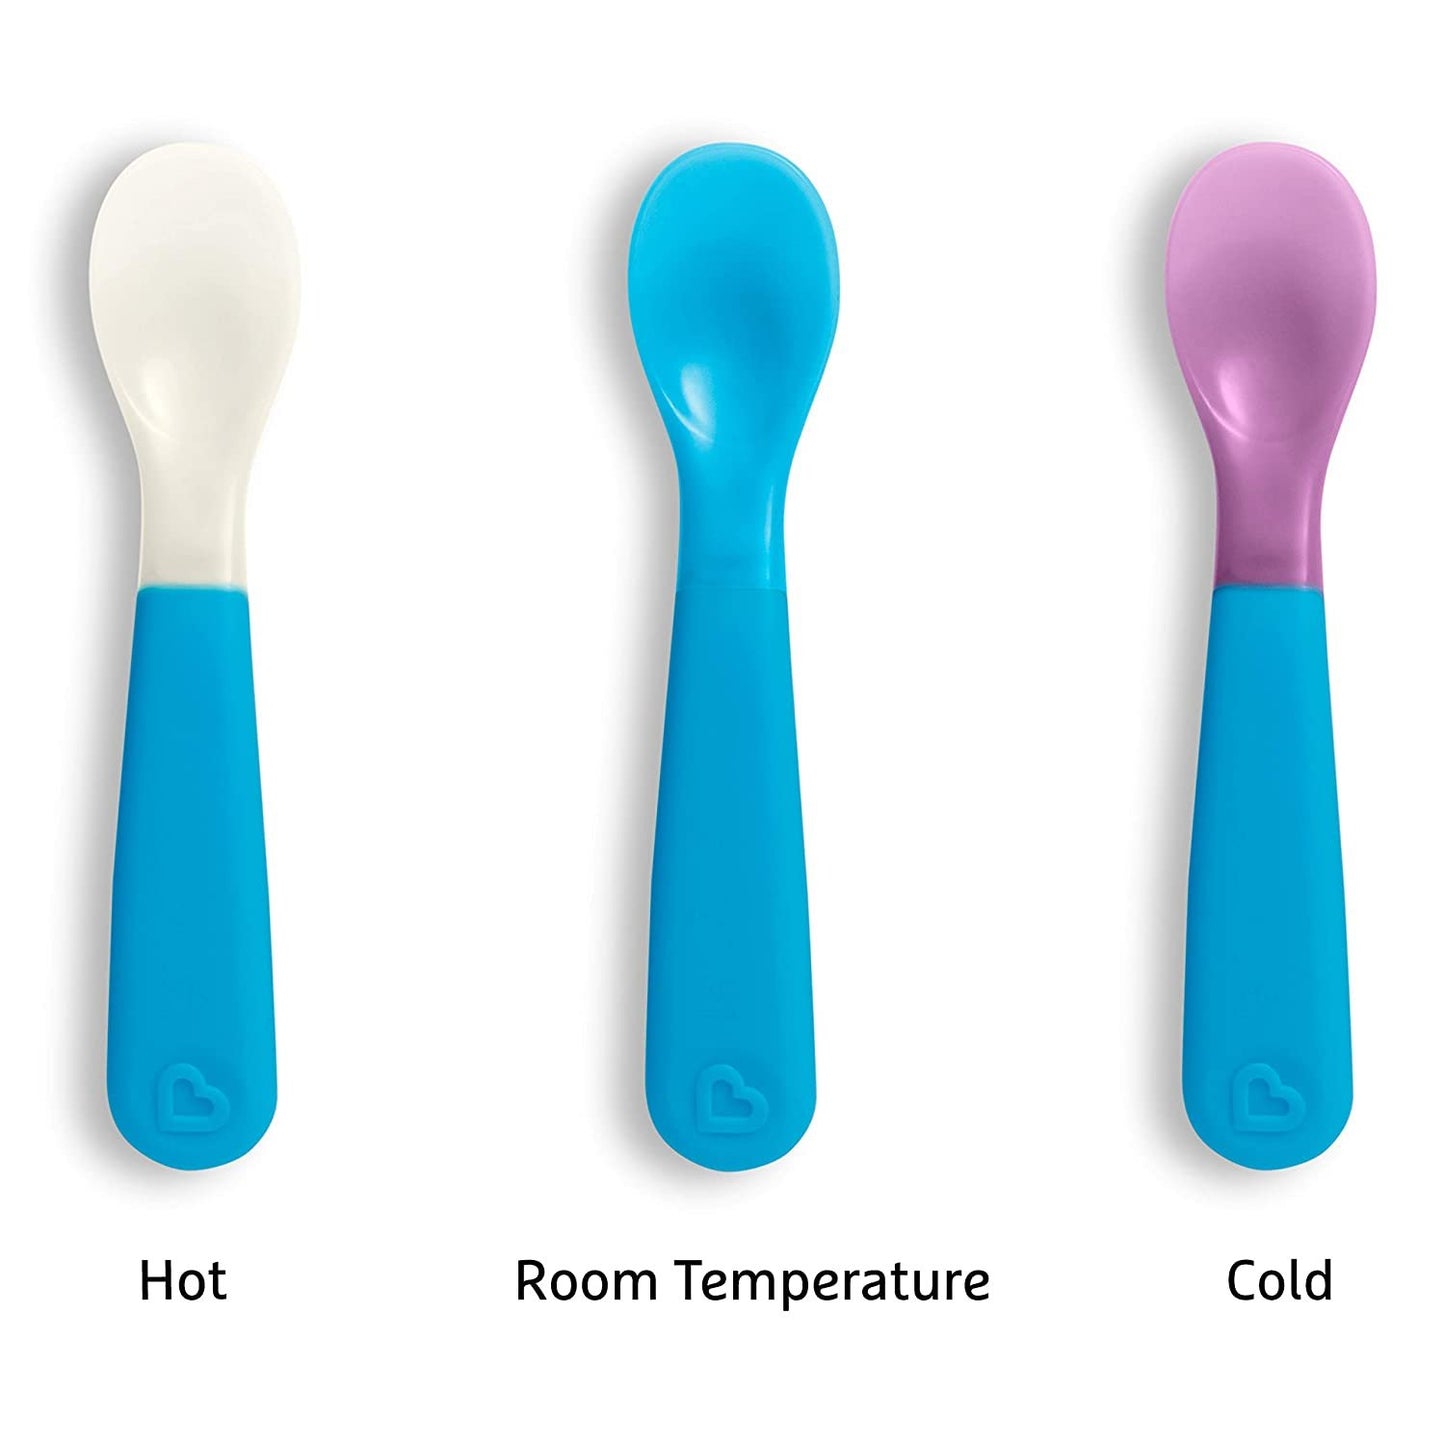 Munchkin Color Reveal Color Changing Toddler Forks and Spoons, 6 Pack